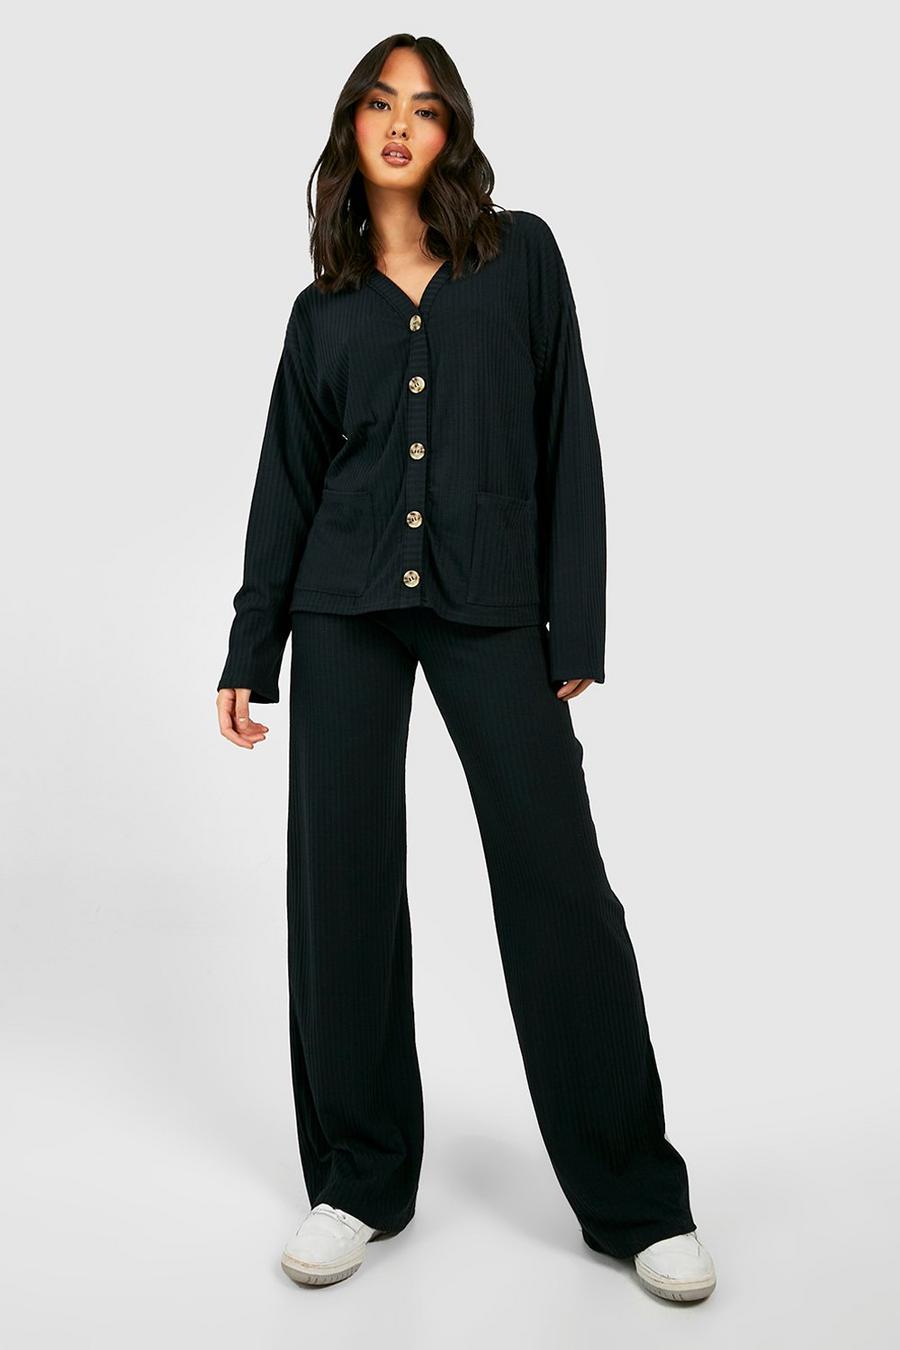 Black Rib Knit Buttoned Cardigan & Pants Two-Piece